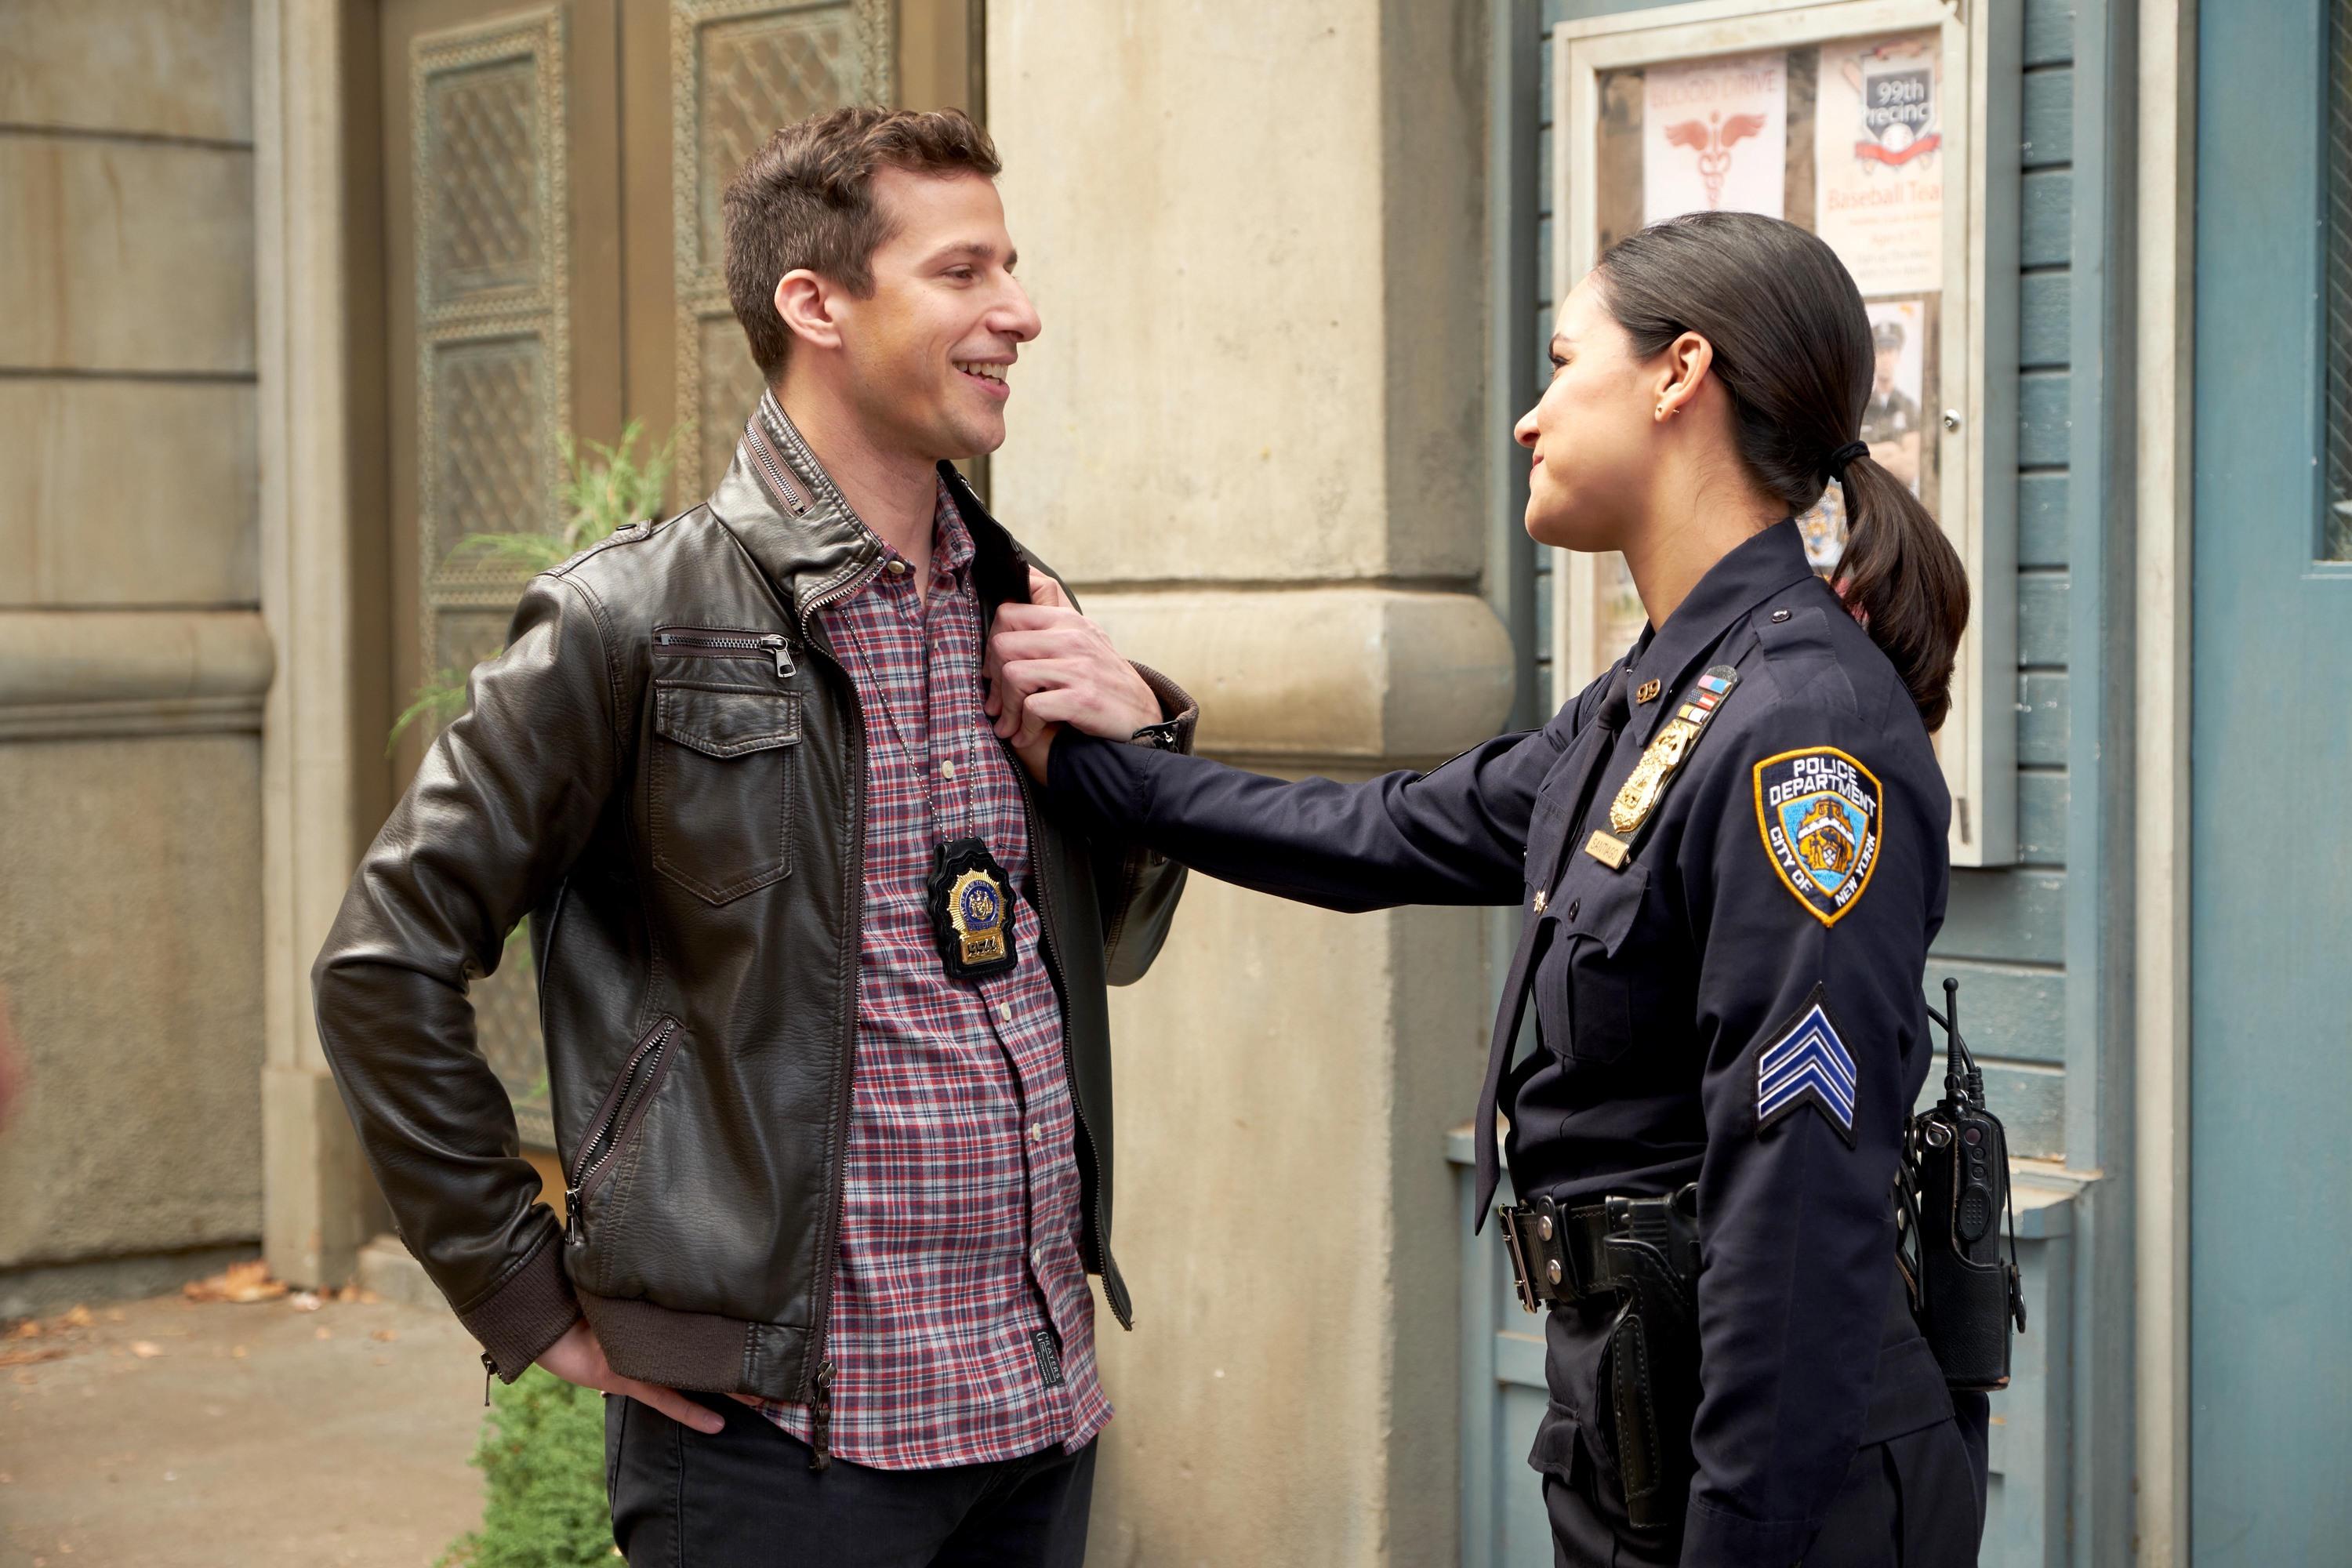 Brooklyn Nine-Nine' Boss on 30-Hour Cancellation and Revival